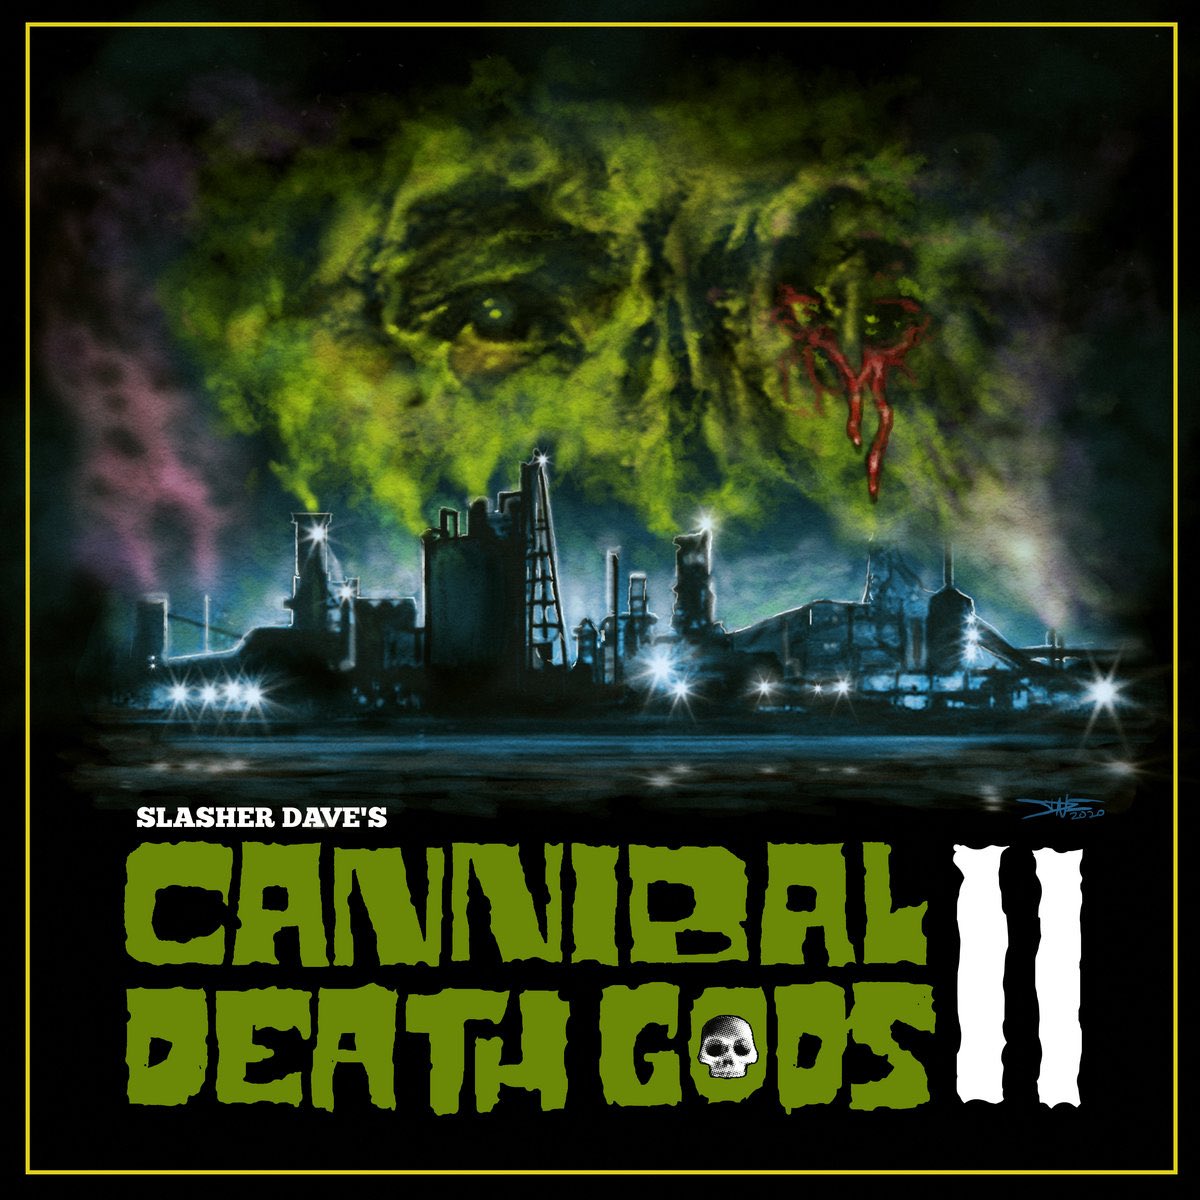 85. Slasher Dave - Cannibal Death Gods II (for whatever reason the slight exotica leanings of this fake soundtrack REALLY got me)